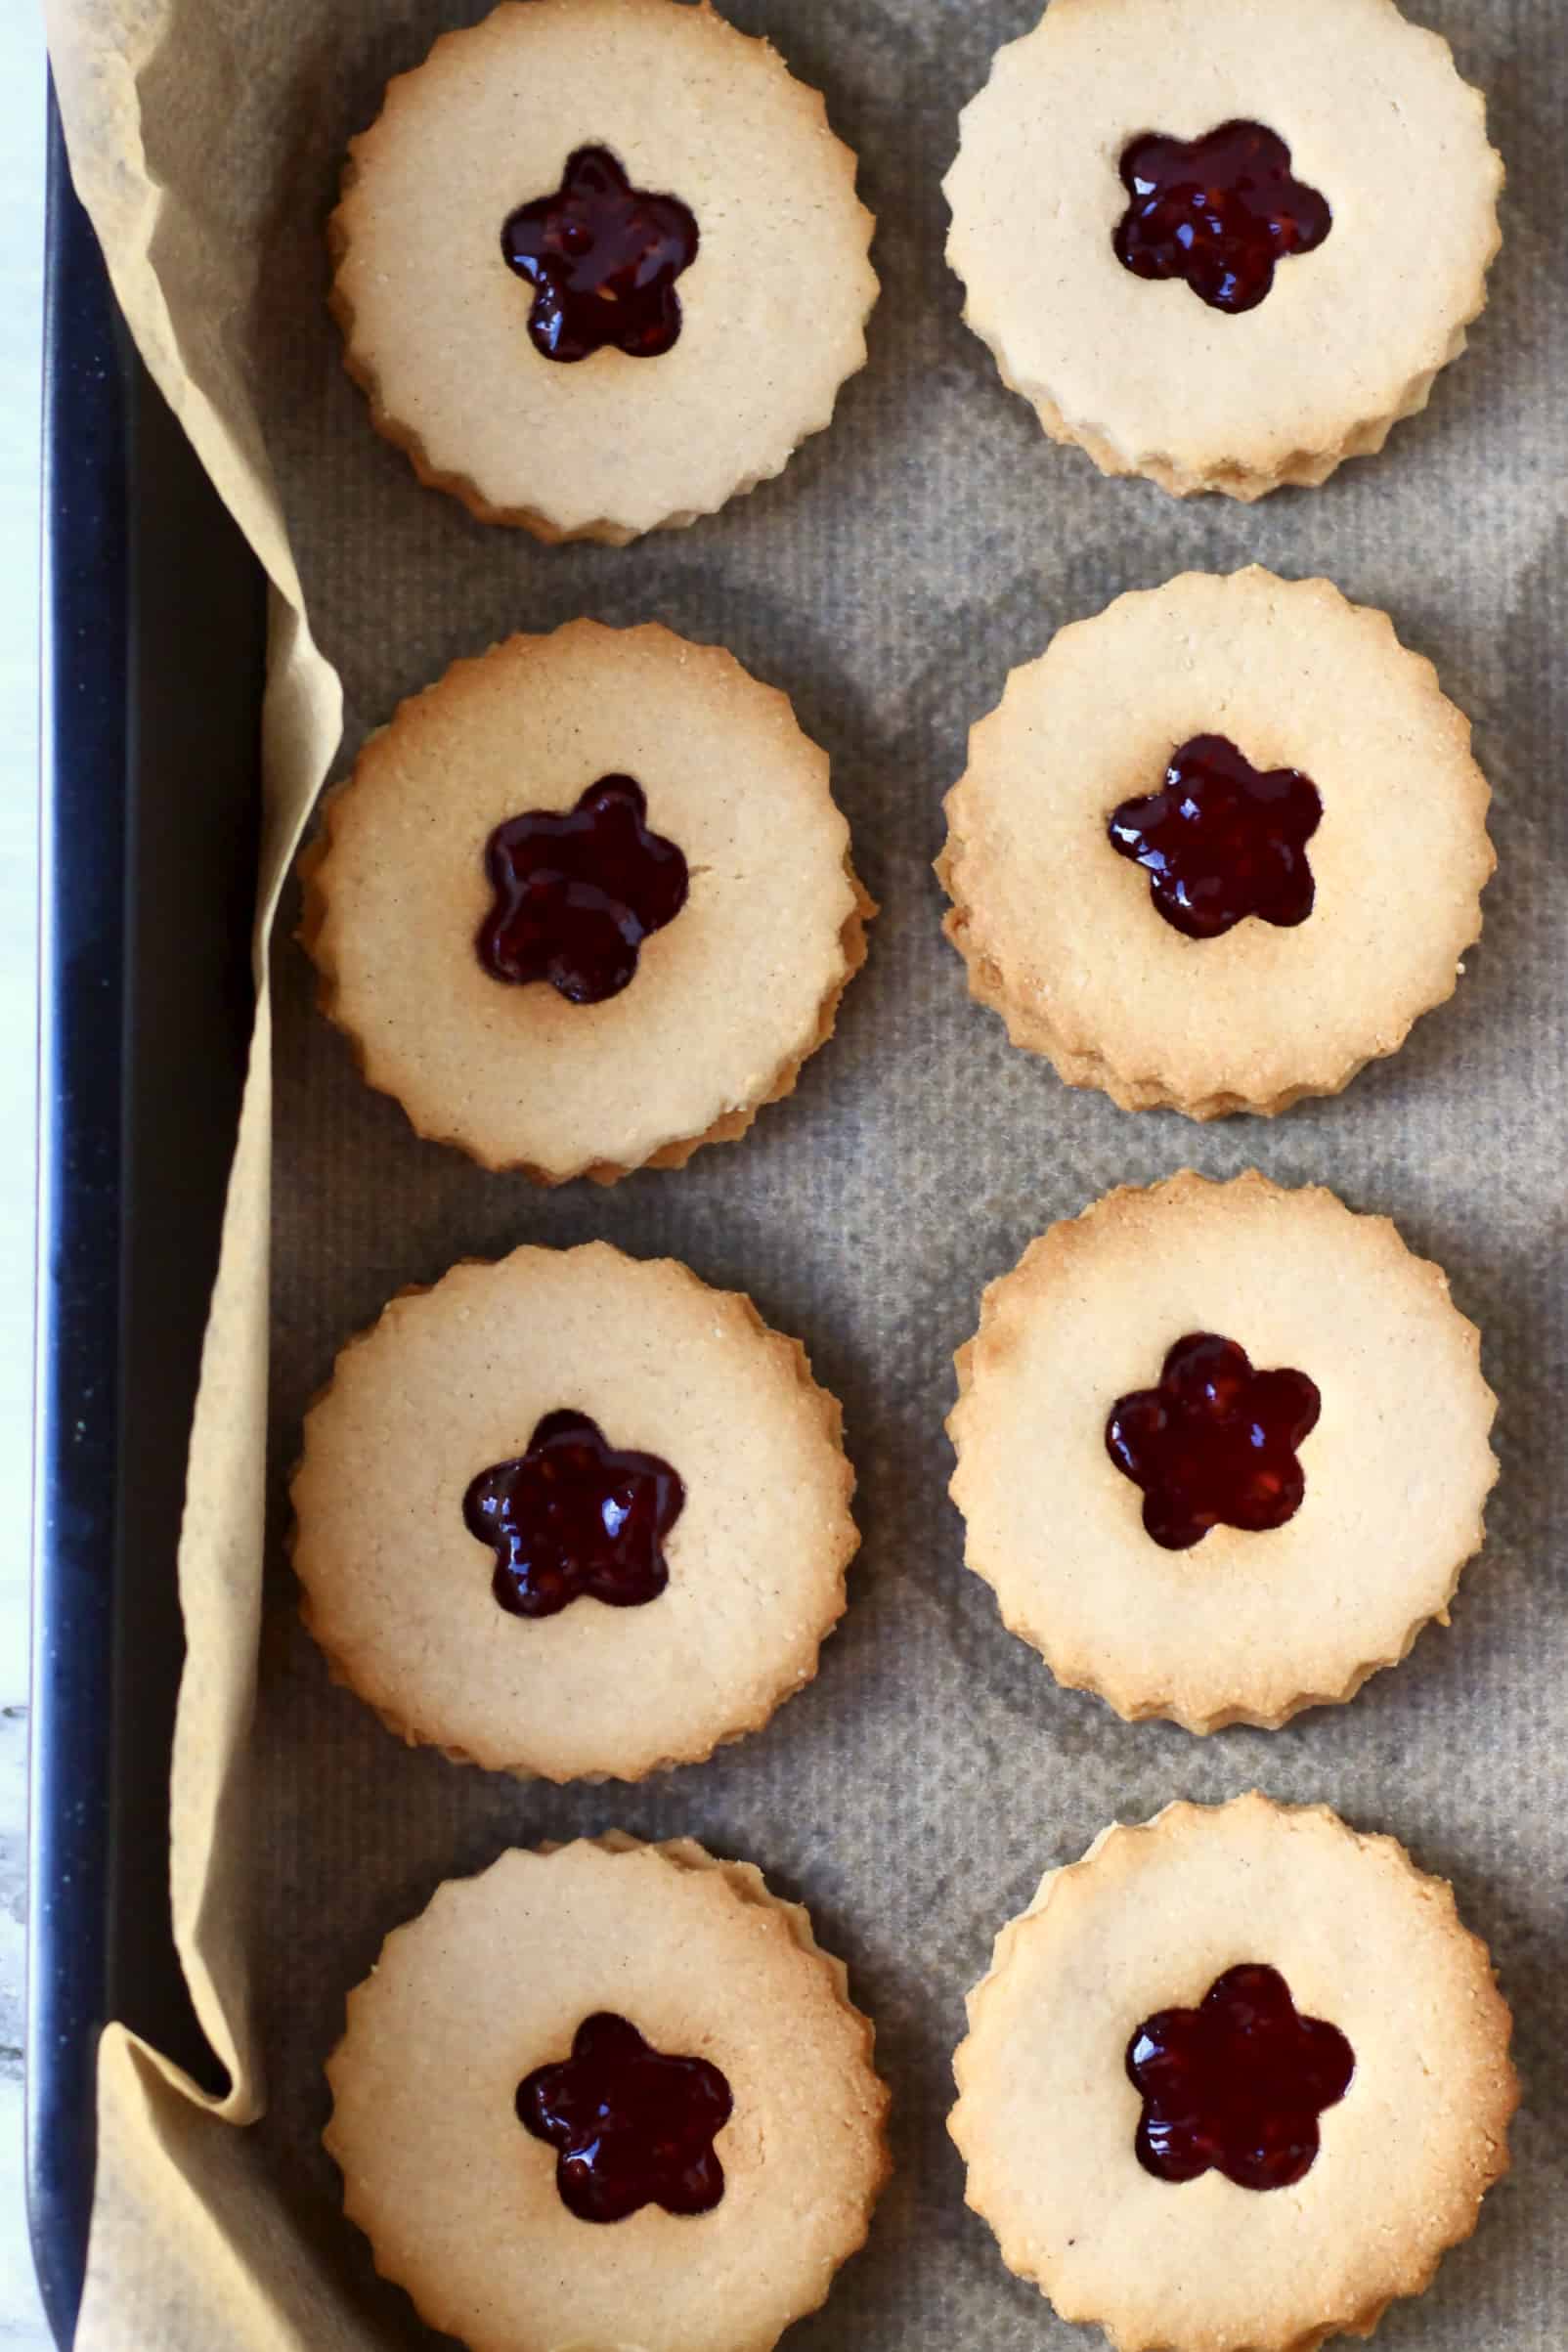 Eight gluten-free vegan linzer cookies sandwiched with raspberry jam on a baking tray lined with baking paper